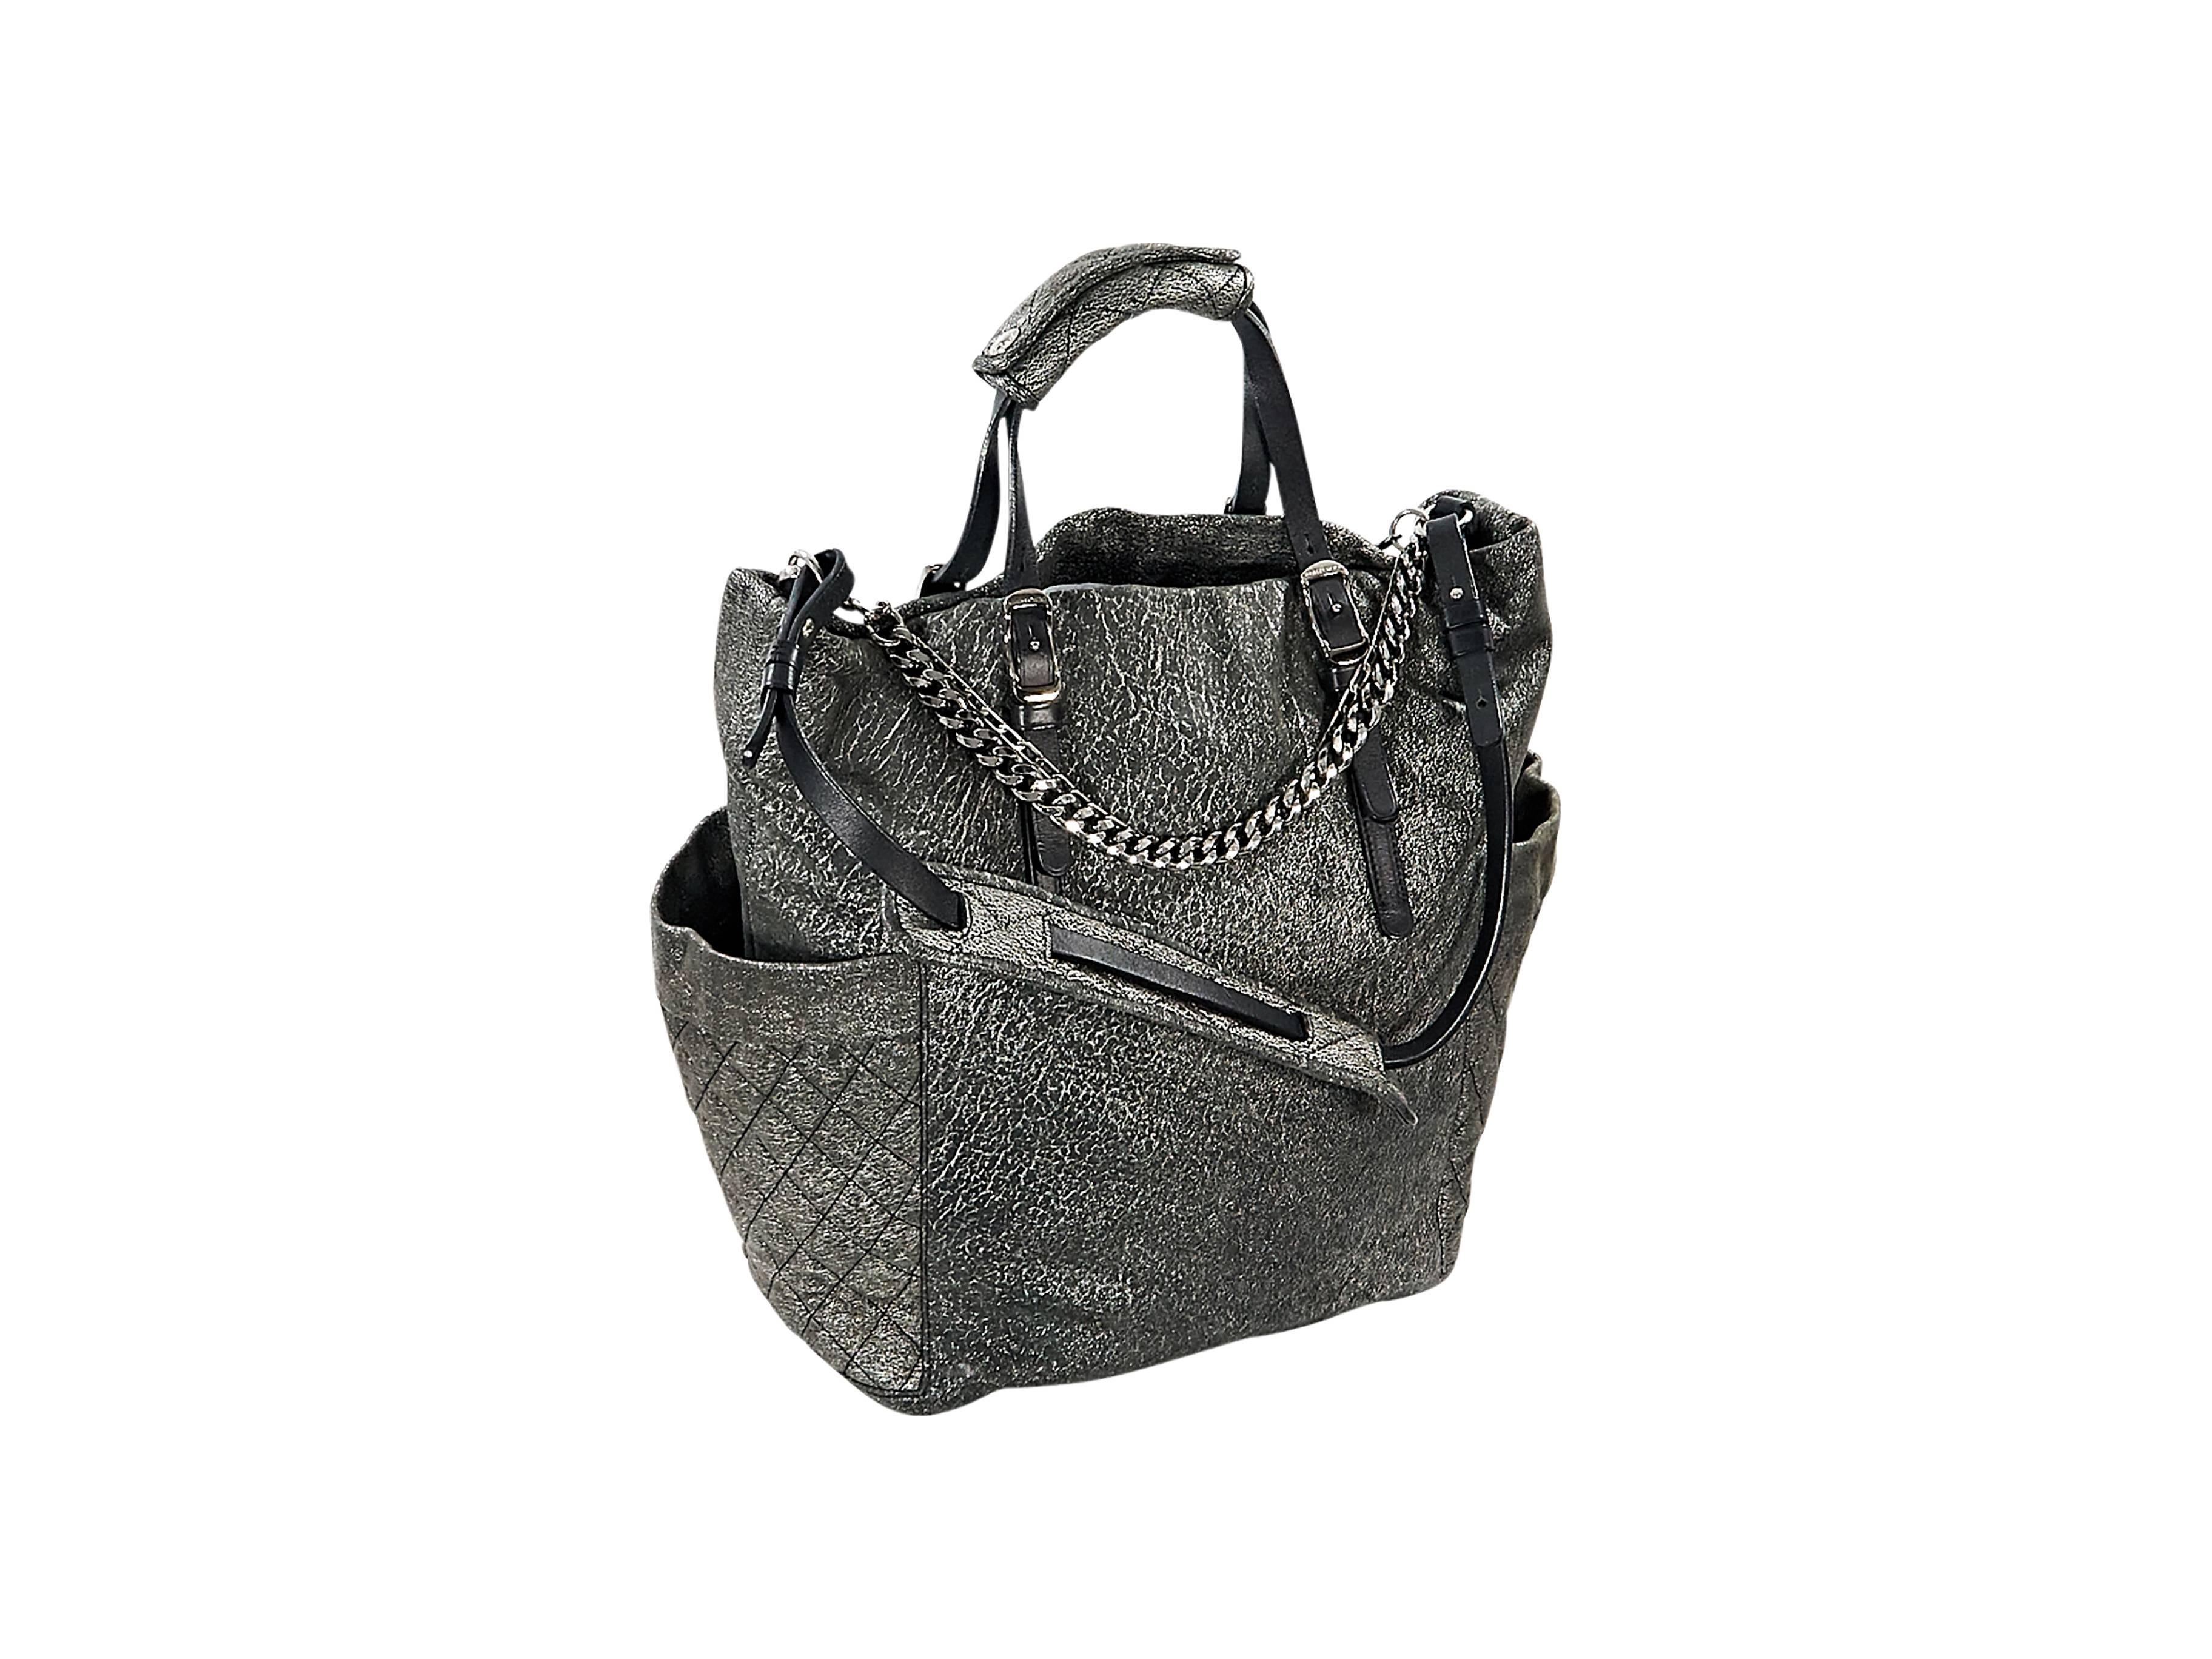 Product details:  Matte silver leather satchel by Jimmy Choo.  Accented with chains.  Top carry handles.  Single shoulder strap.  Side exterior slide quilted pockets.  Lined interior with inner zip and slide pockets.  Silvertone hardware.  15